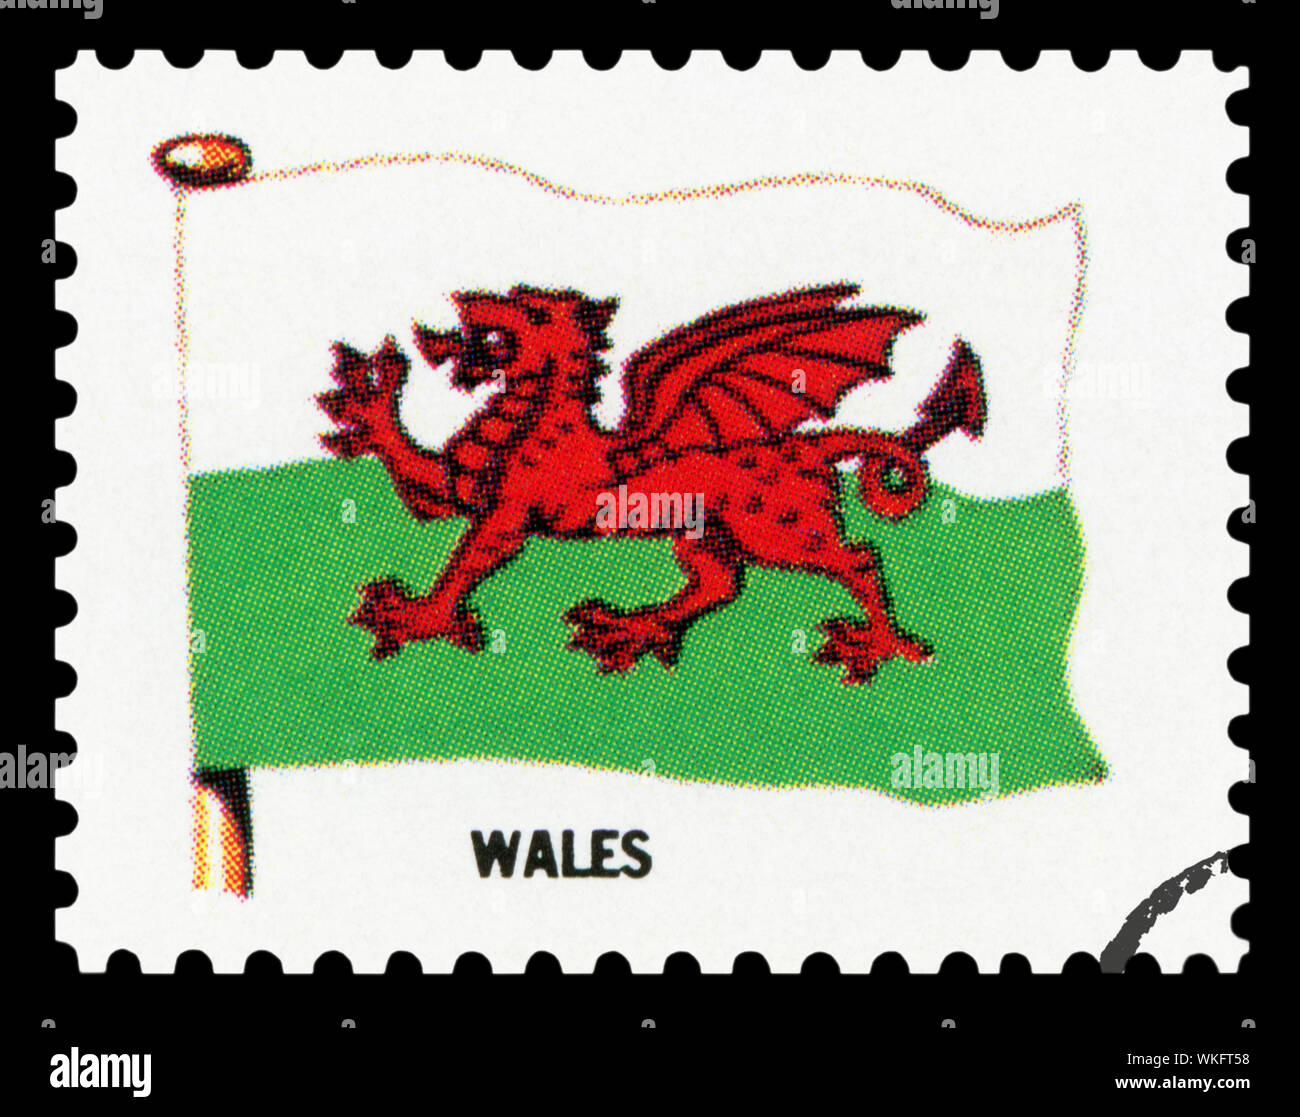 WALES FLAG - Postage Stamp isolated on black background. Stock Photo